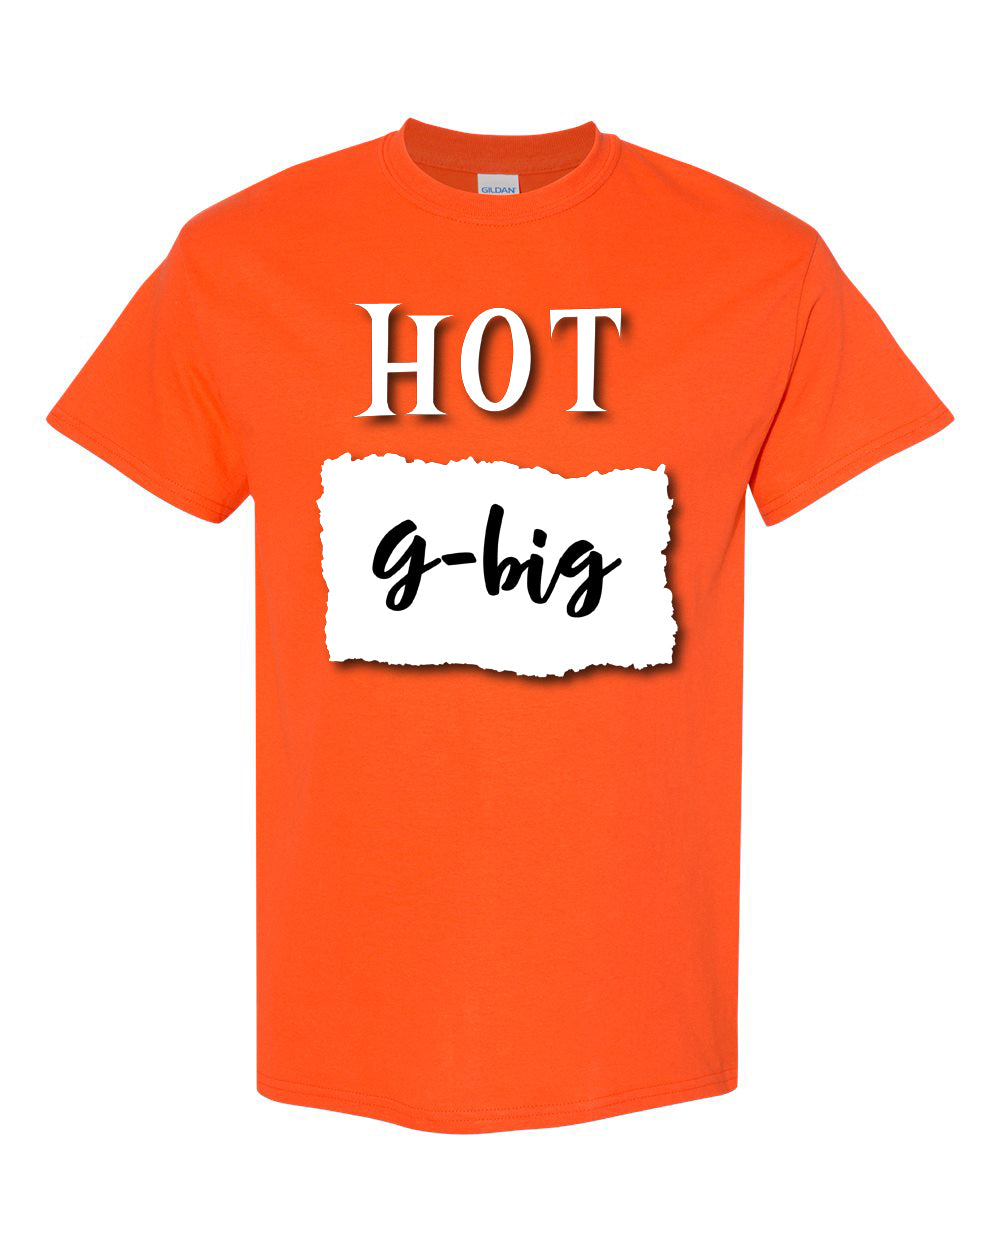 an orange t - shirt with the words hot and g - vibes printed on